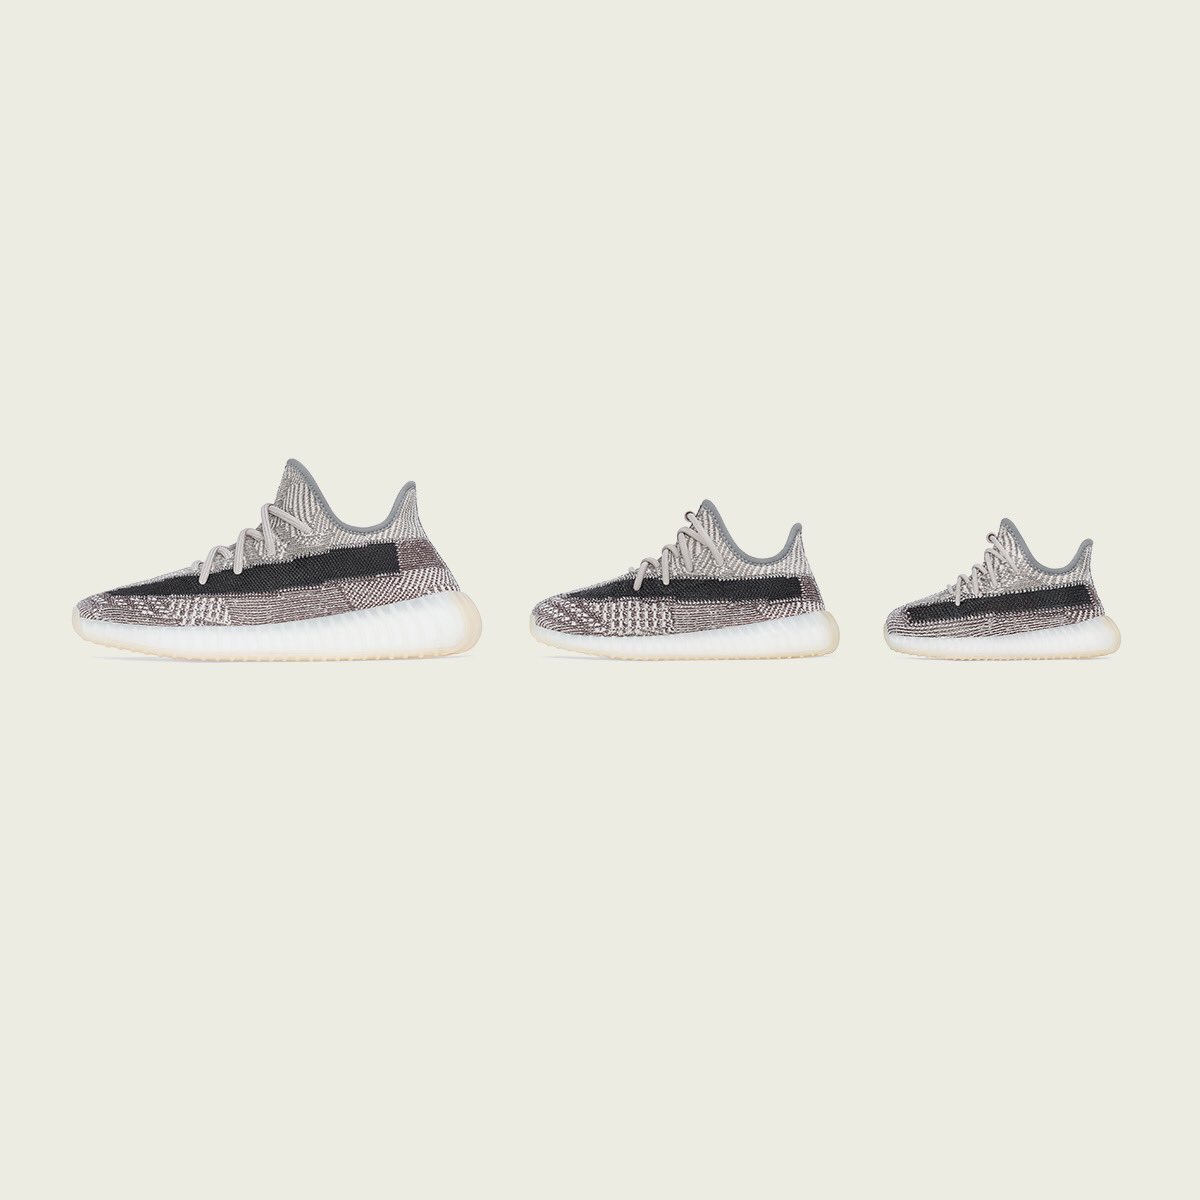 Visión general espada Burlas UNDEFEATED on Twitter: "adidas Yeezy Boost 350 V2 'Zyon' // Available  Saturday 7/18 in Full Family Sizing at https://t.co/rPhV7ZP2Fc  https://t.co/ofRzJIGuLH" / Twitter